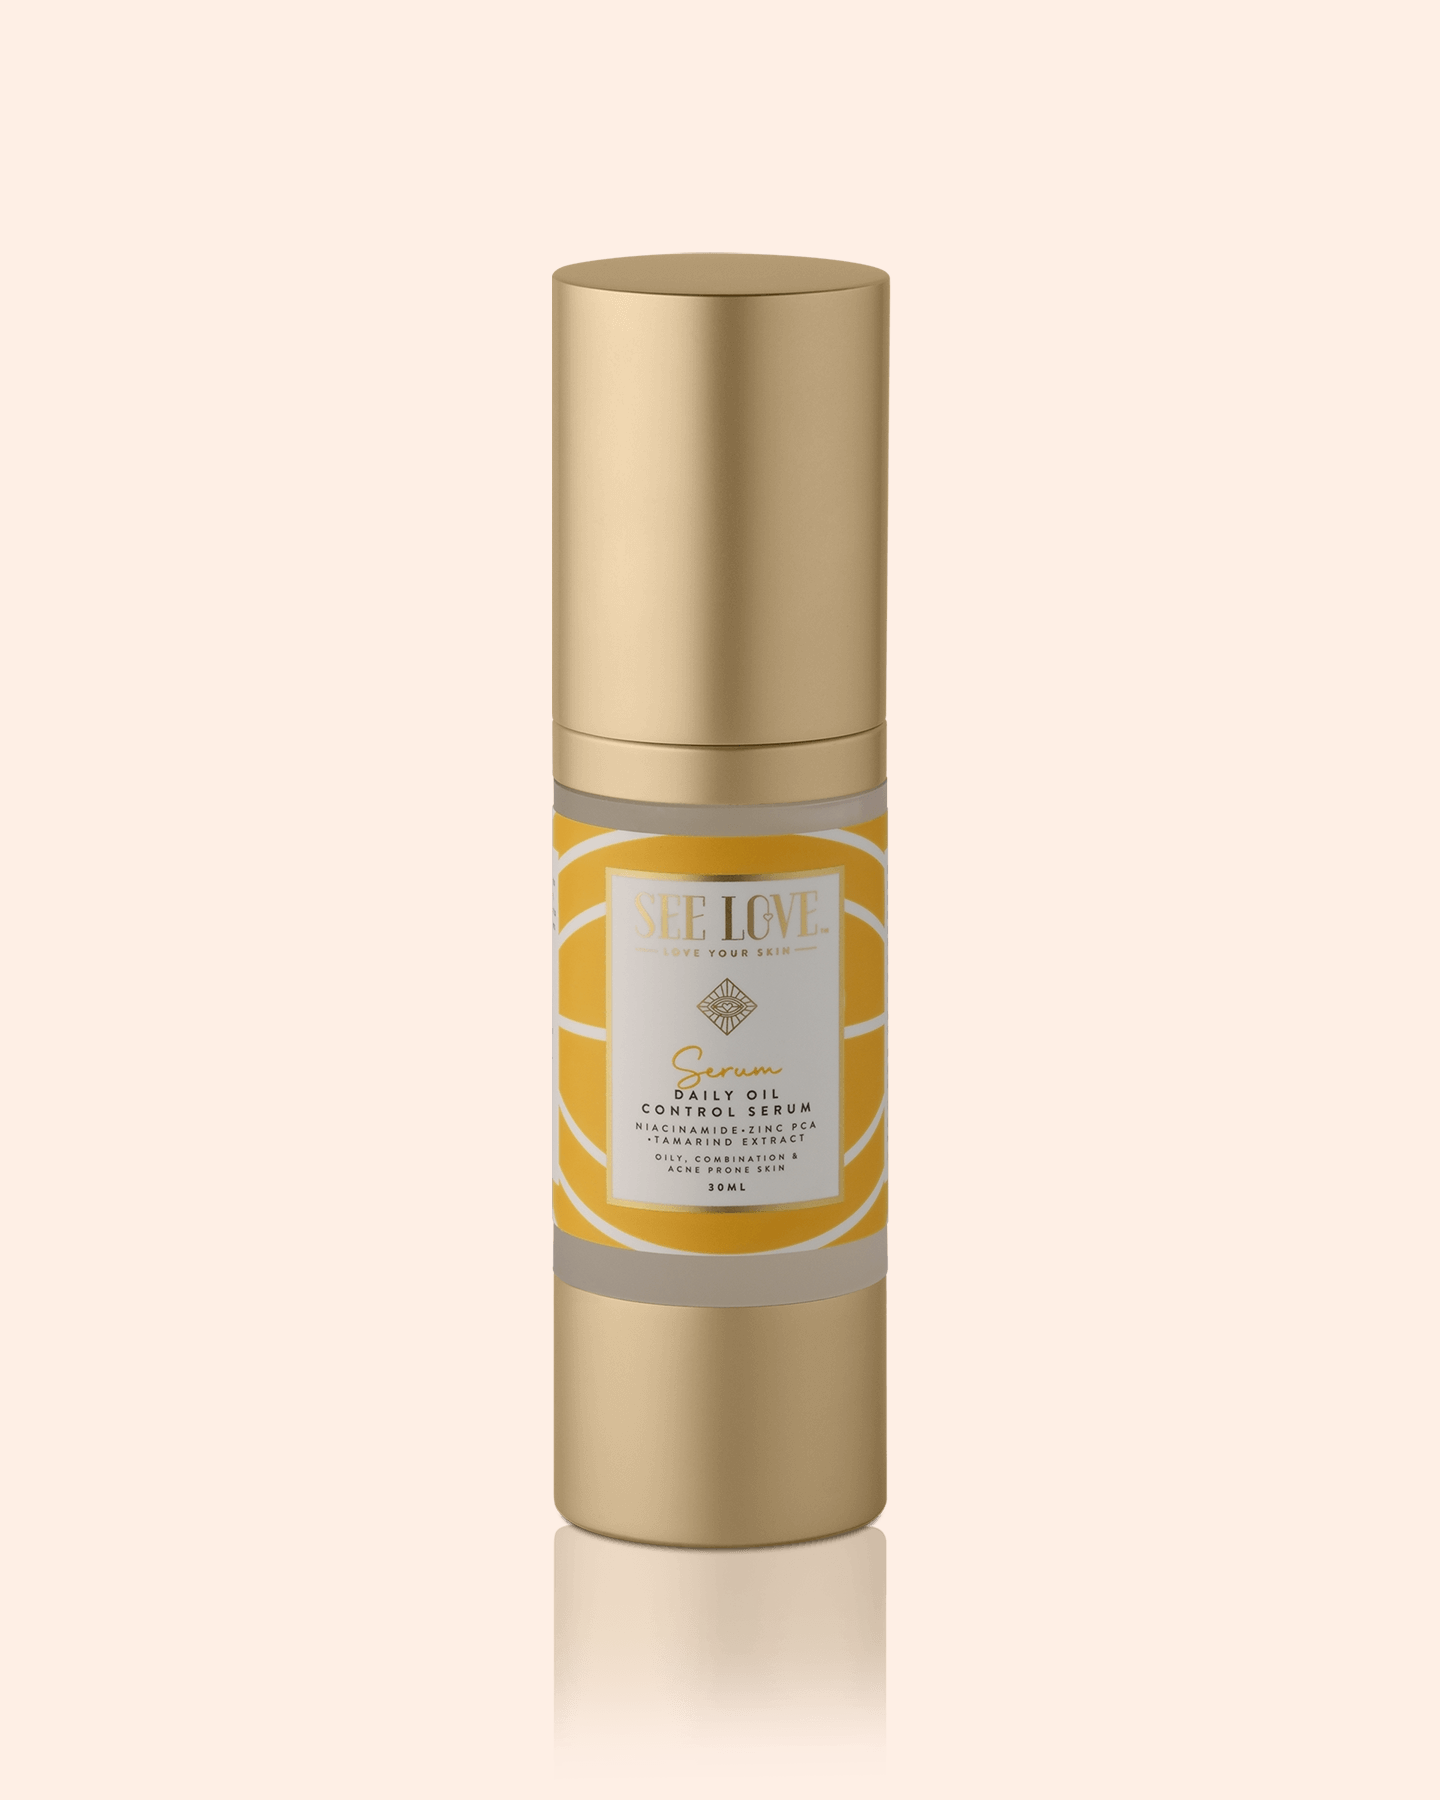 See Love - Daily Oil Control Serum